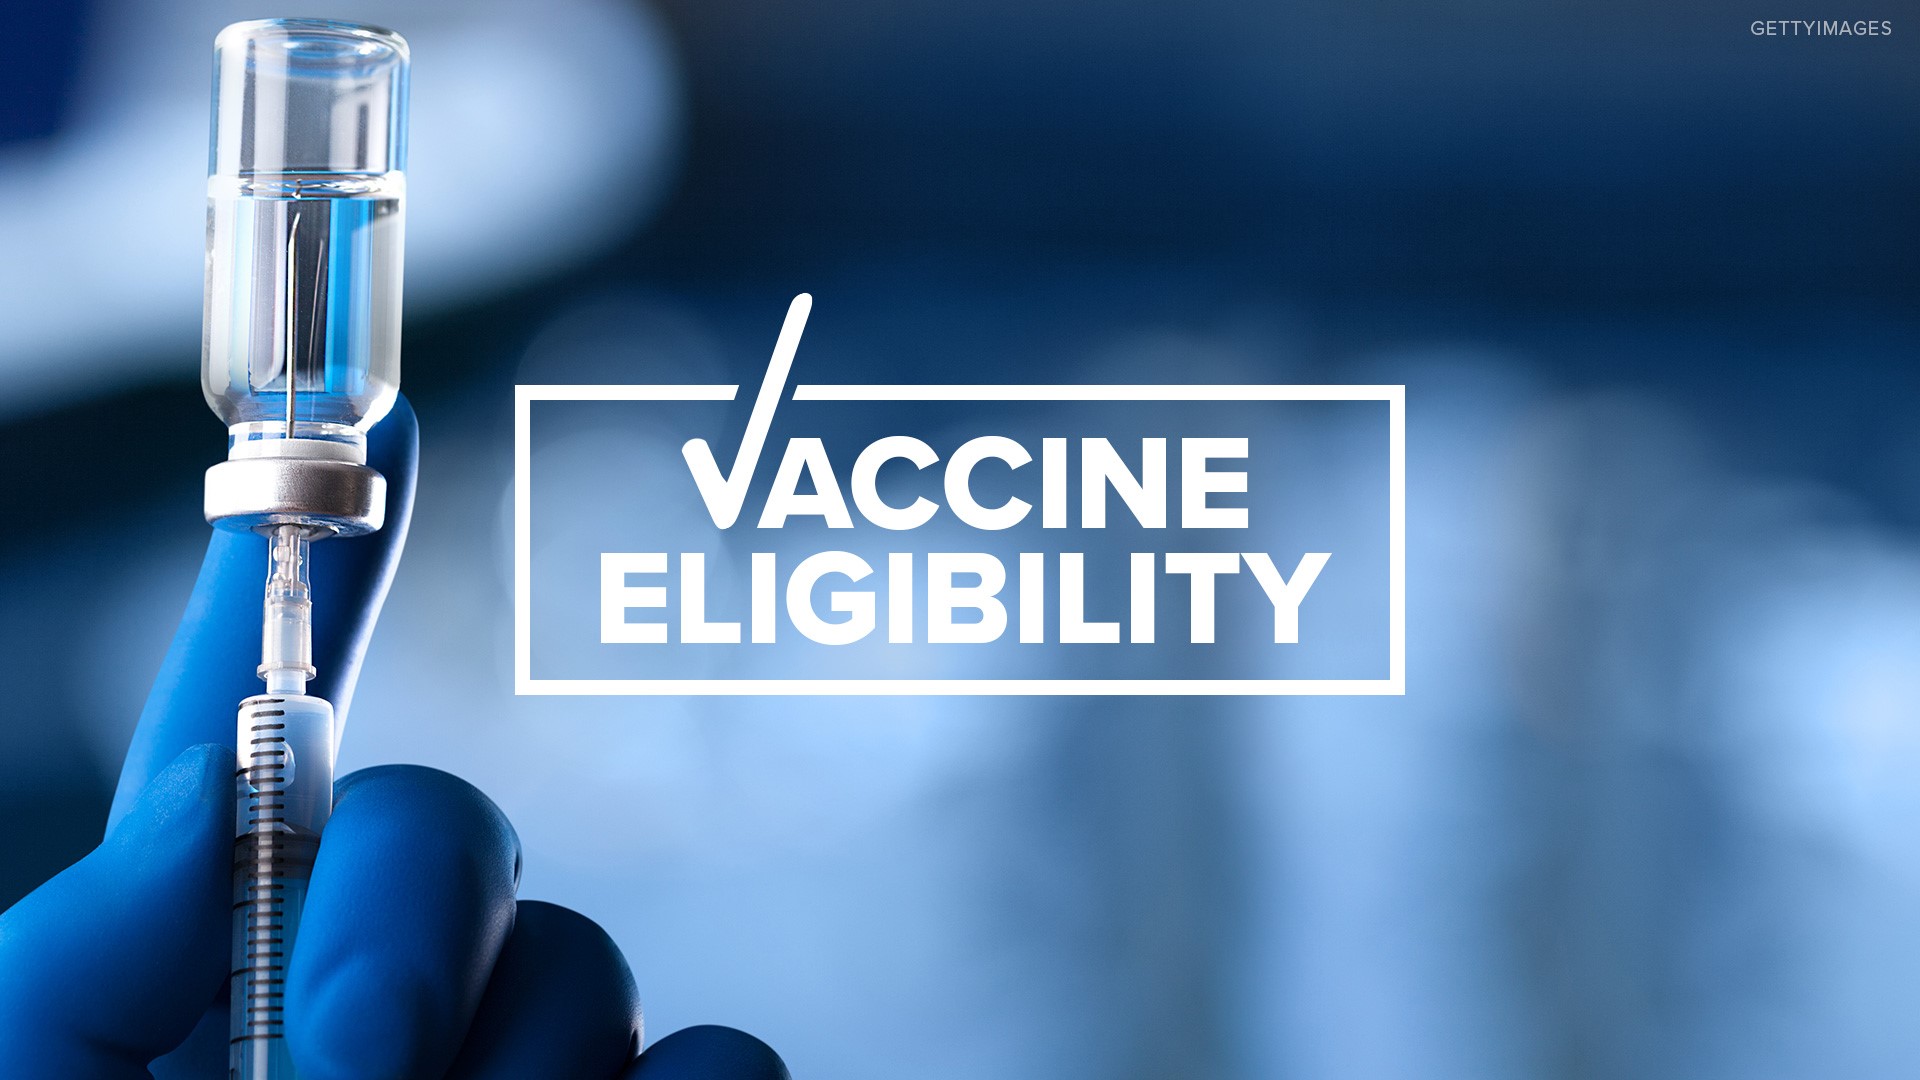 The announcement of the expanded eligibility taking effect March 15 comes on the same day San Diego super station shuts down for 3 days due to vaccine shortage.